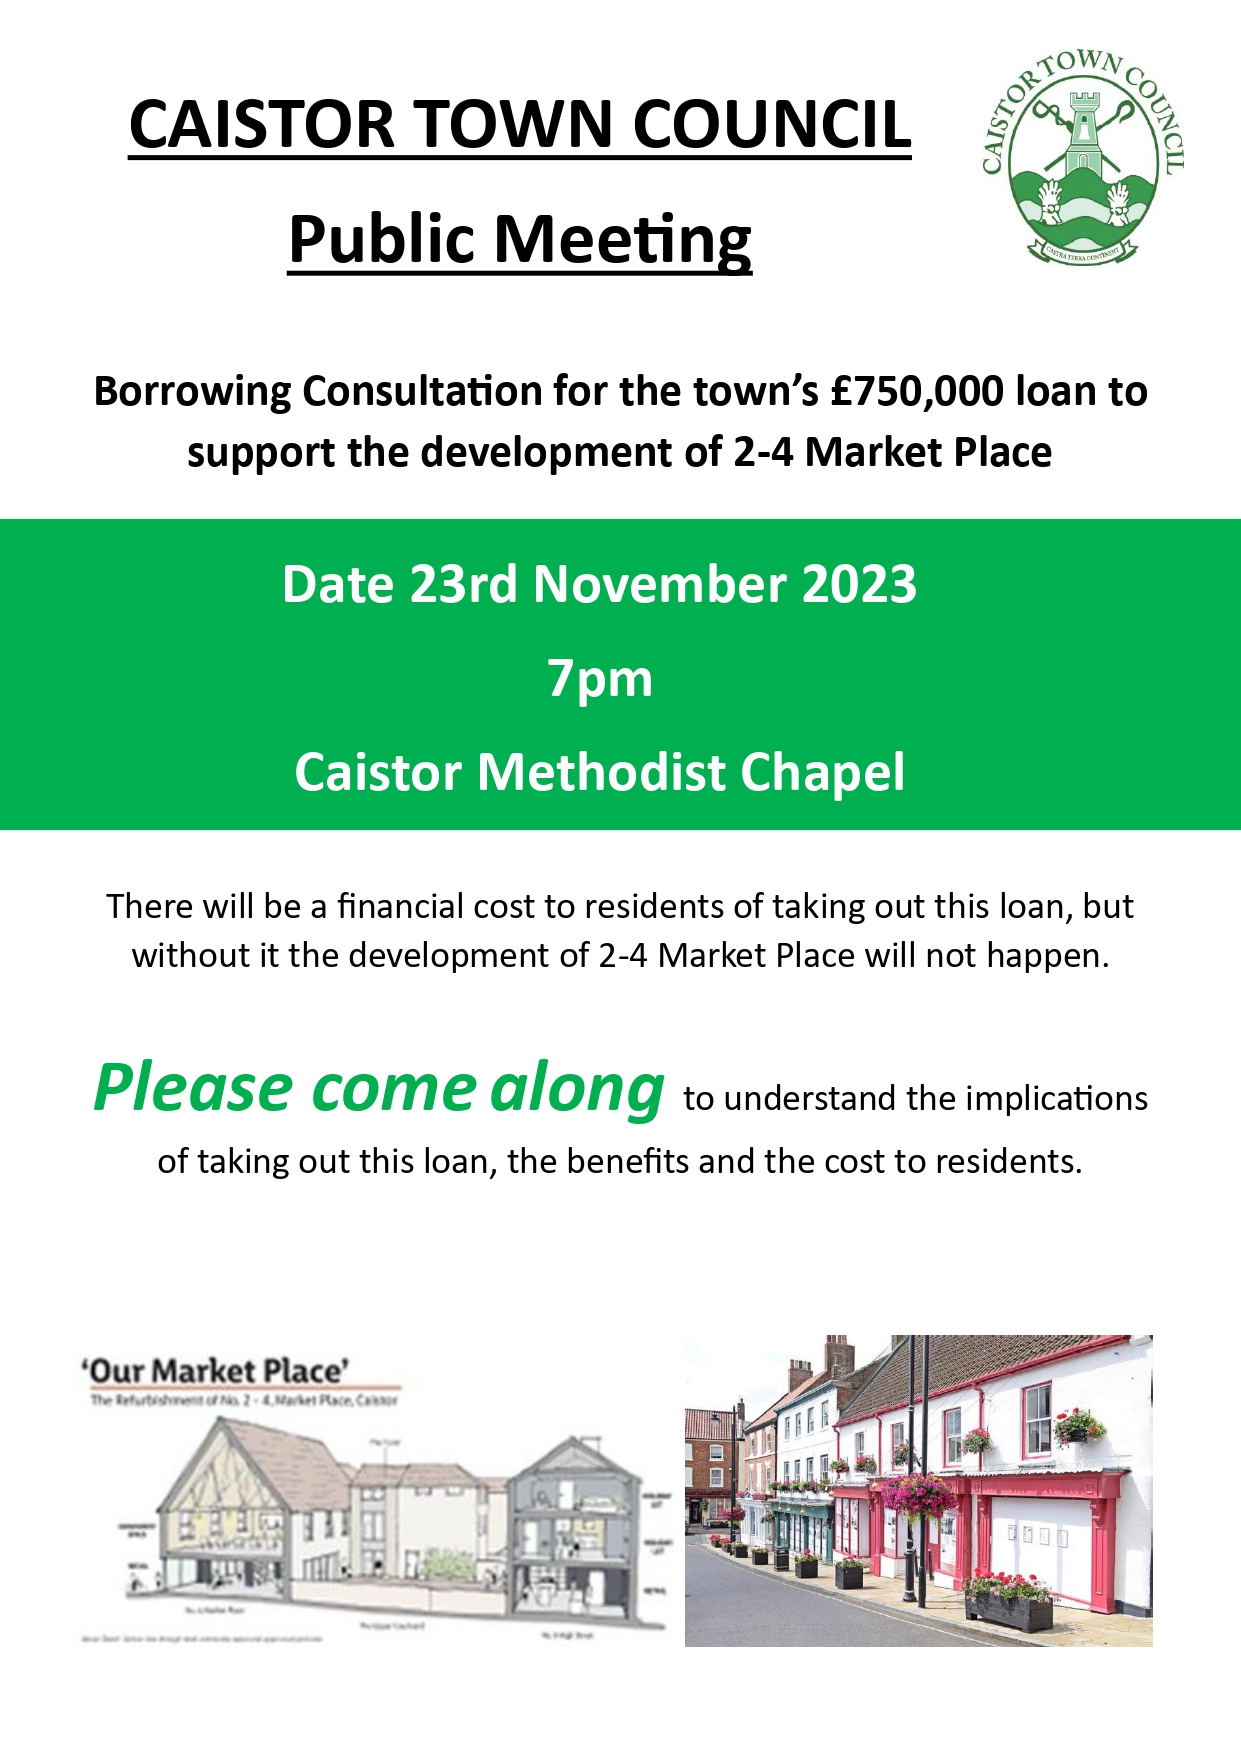 Caistor Town Council has been asked to provide a loan of £750,000 to Caistor and District Community Trust Ltd to support the redevelopment of 2-4 Market Place.  
As a small town council with an income of around £120,000 a year, we would need to borrow the money to loan to the project group.
The annual repayments would be £60,000 a year over 50 years totalling over £1.89million. The proposal is for CDCT Ltd to make the loan repayments to us to enable us to pay back our loan.
Taking out a loan of this size complex and Government guidelines dictate that we need to follow a due process, including assessing the impact of the loan on residents council tax, due diligence to ensure the loan will be repaid and setting up safety nets in the event that CDCT fails to make repayments.  Our proposed safety nets are: securing a sole first charge on the property so that in the event CDCT cannot pay their loan to us, we will at least receive some money from the sale of the property; secondly an independent financial viability review of the project; thirdly, implementing a legal loan agreement between the town council and CDCT; and finally, consulting with residents.
All of this takes time and costs money but we remain committed to making the right decision for all of the residents of Caistor and for the future of the town, and will keep resident updated as progress regarding the loan is made.
On 02/11/23  CTC have been advised by our solicitors that we have secured a sole first charge over the property. This means that CTC would be in strong position to recover funds if the project fails and the property is sold, thereby helping to protect the interests of Caistor residents.
The next 2 stages in our due diligence are the financial review of the project business plan and Public consultation. The public consultation will take place on the 23rd of November starting at 7pm at the Caistor Methodist Chapel, when CTC will engage with the residents of Caistor to advise on the implications of taking up the loan on behalf of CDT. 
